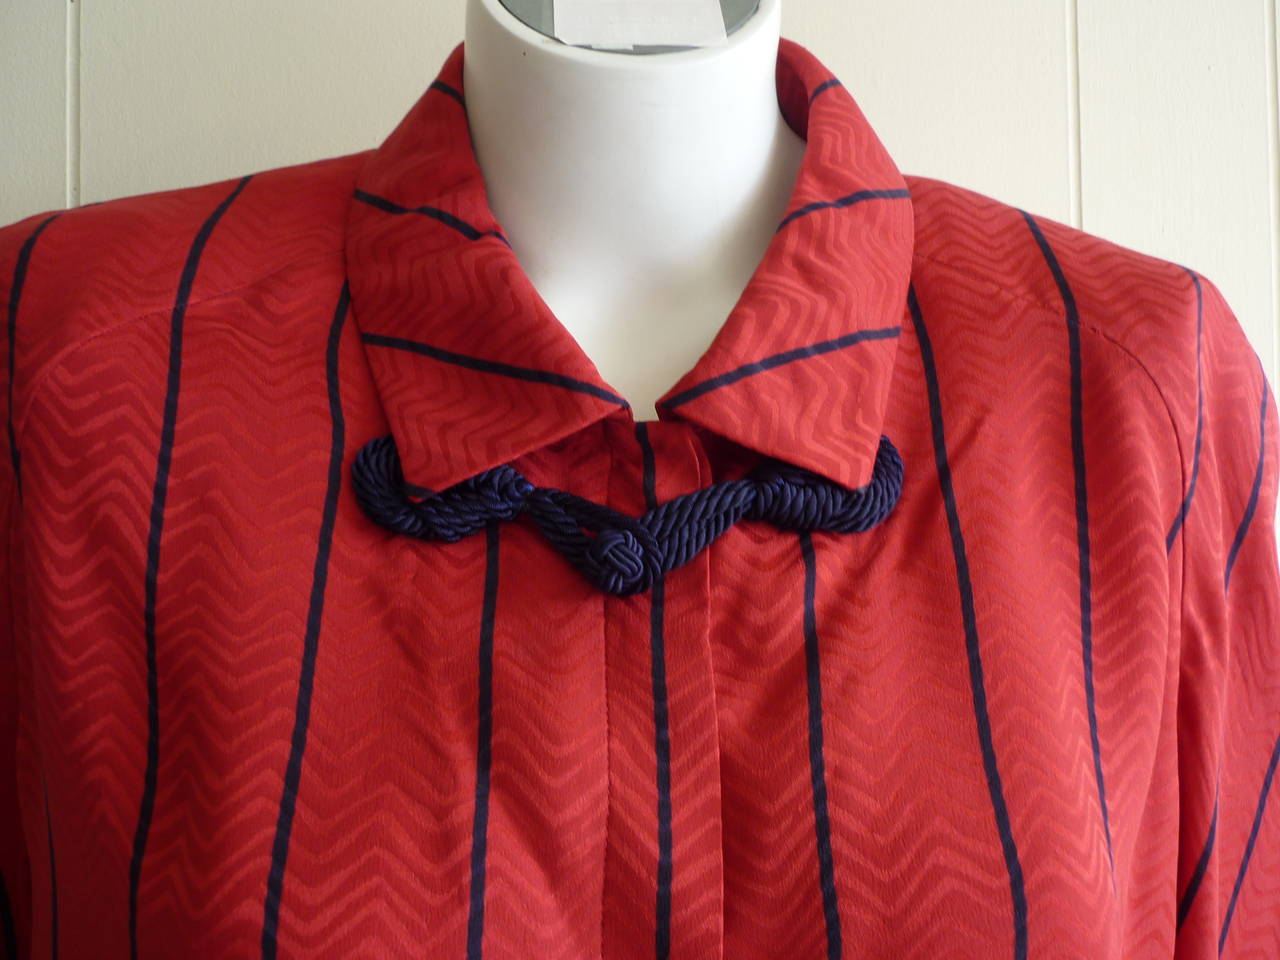 Very nice and elegant blouse with an unsual loop accent at the neck. Closure is by way of hidden buttons which goes half way down the front.